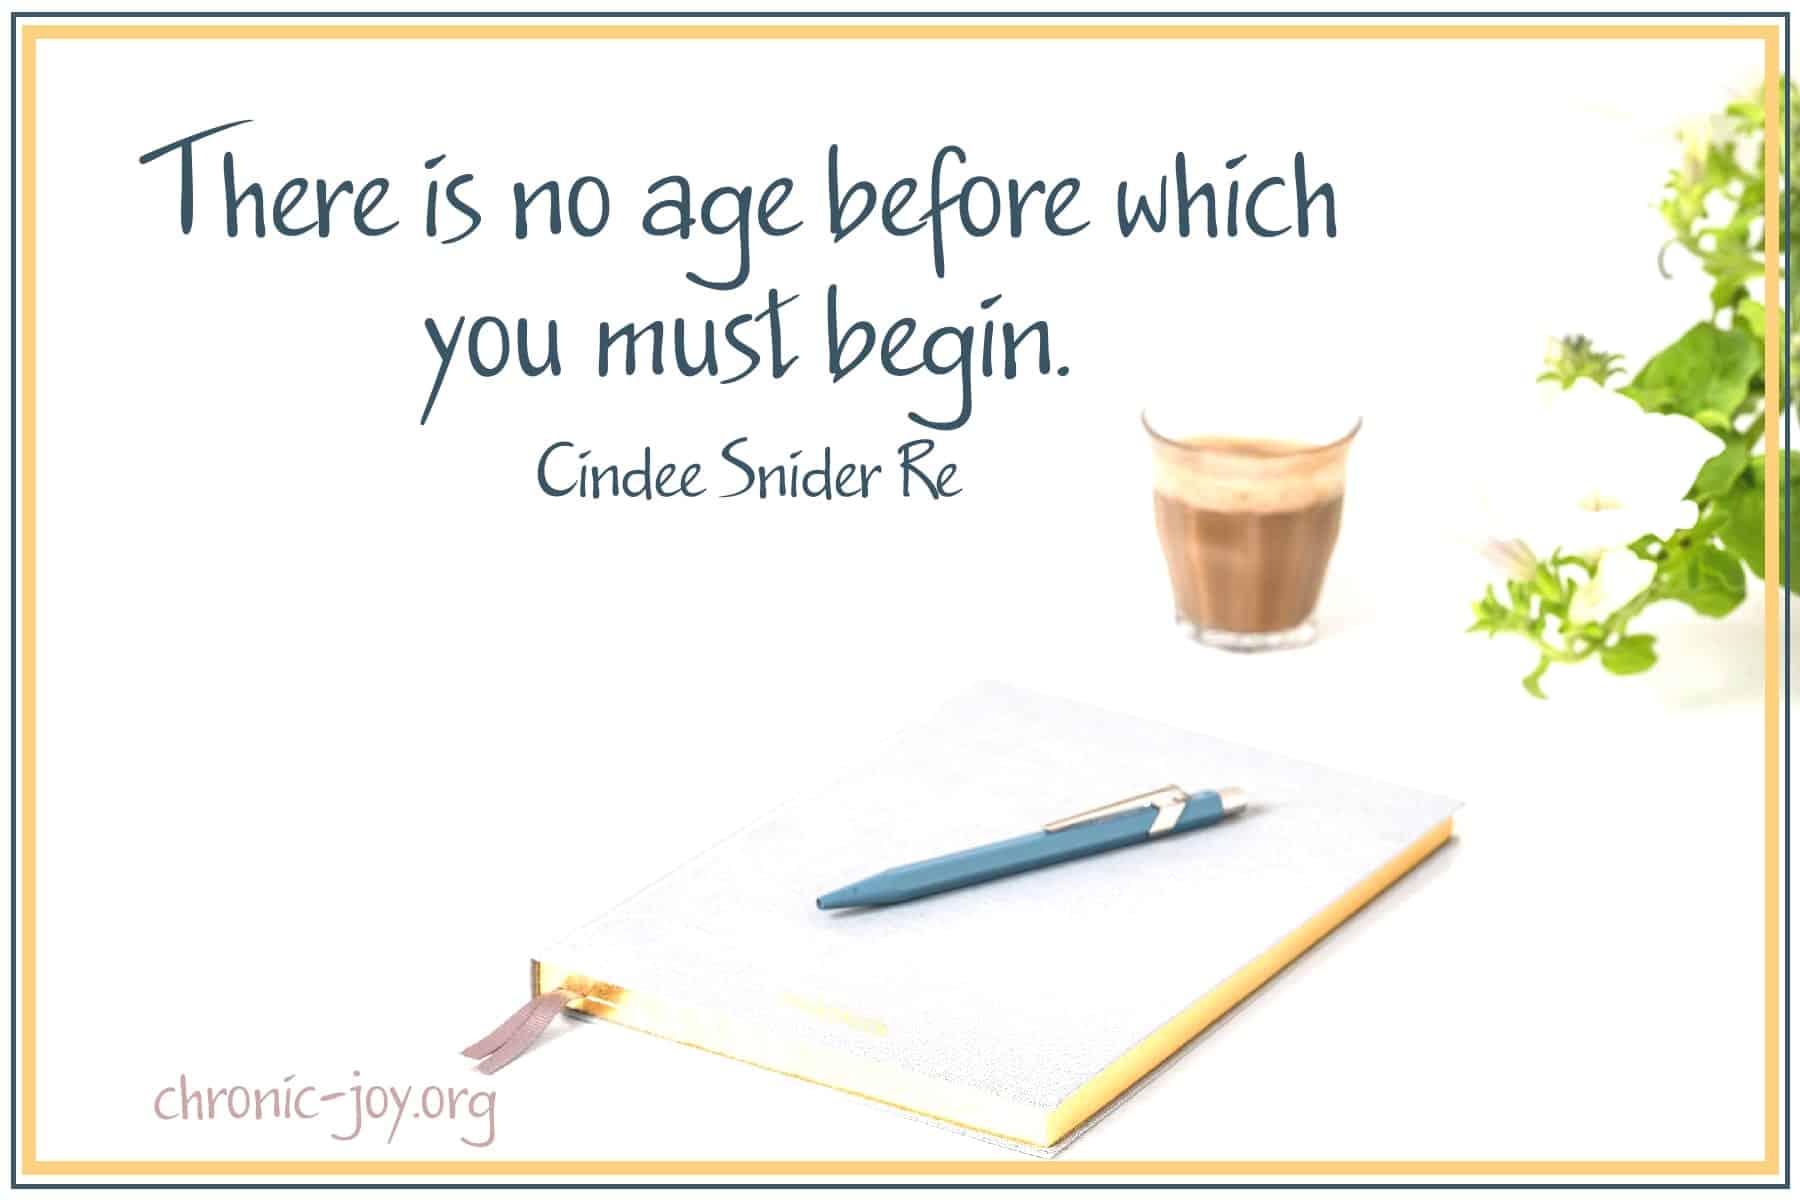 "There is no age before which you must begin." Cindee Snider Re